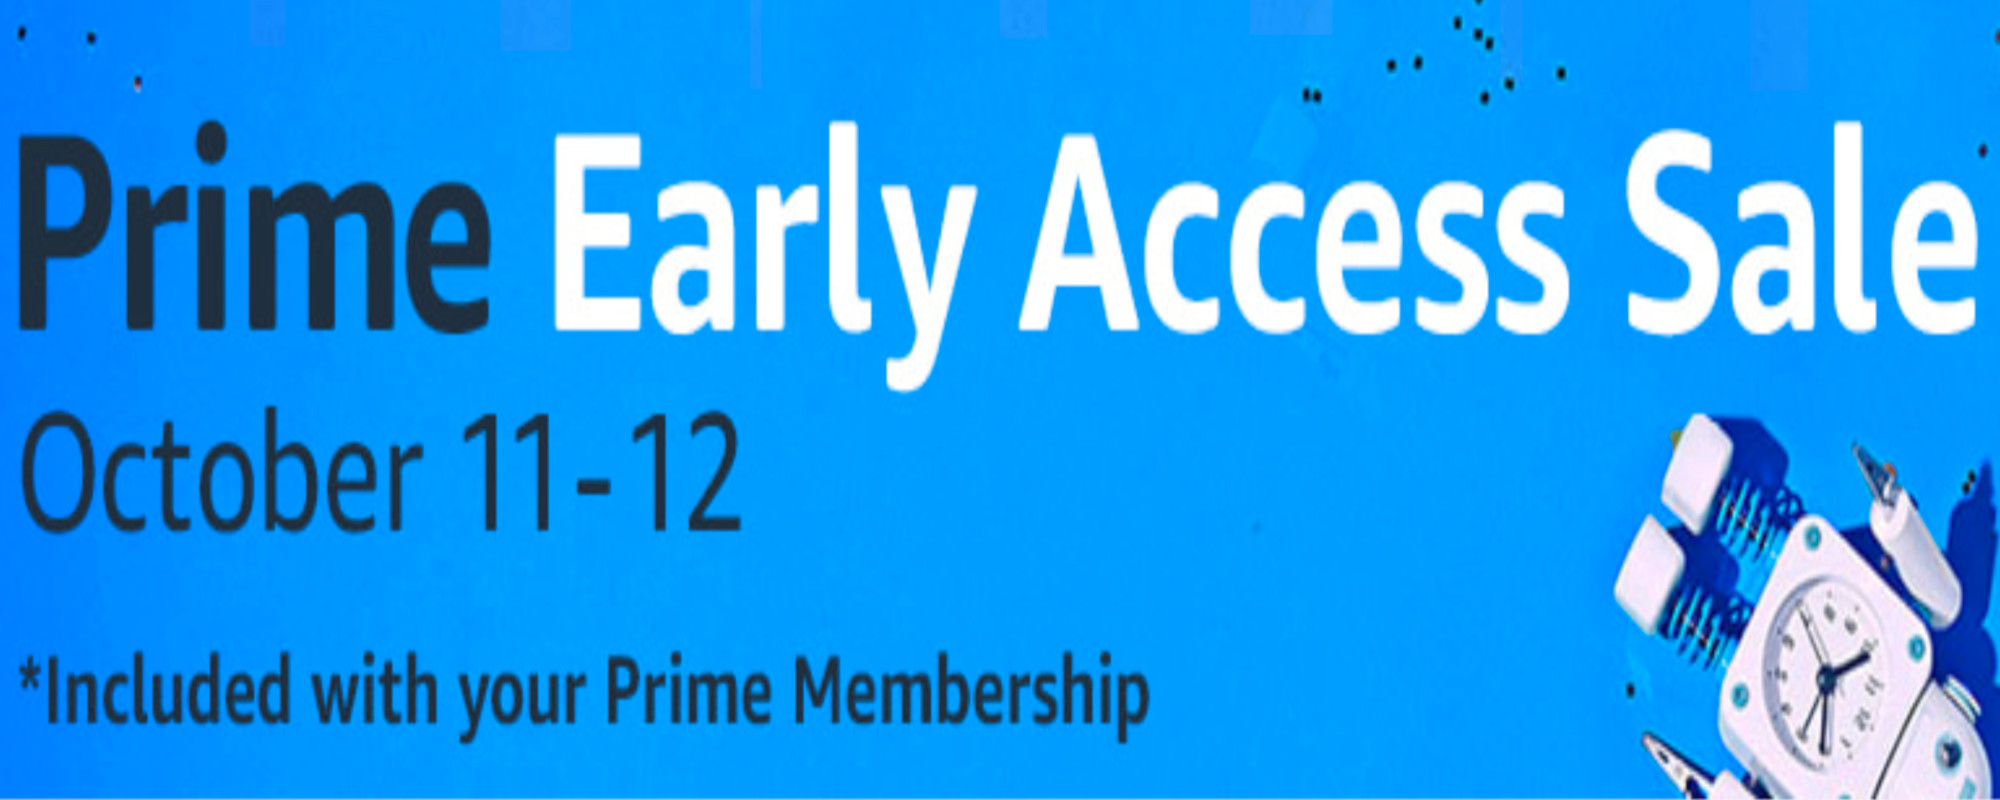 The Best Deals in the  Prime Early Access Sale 2022